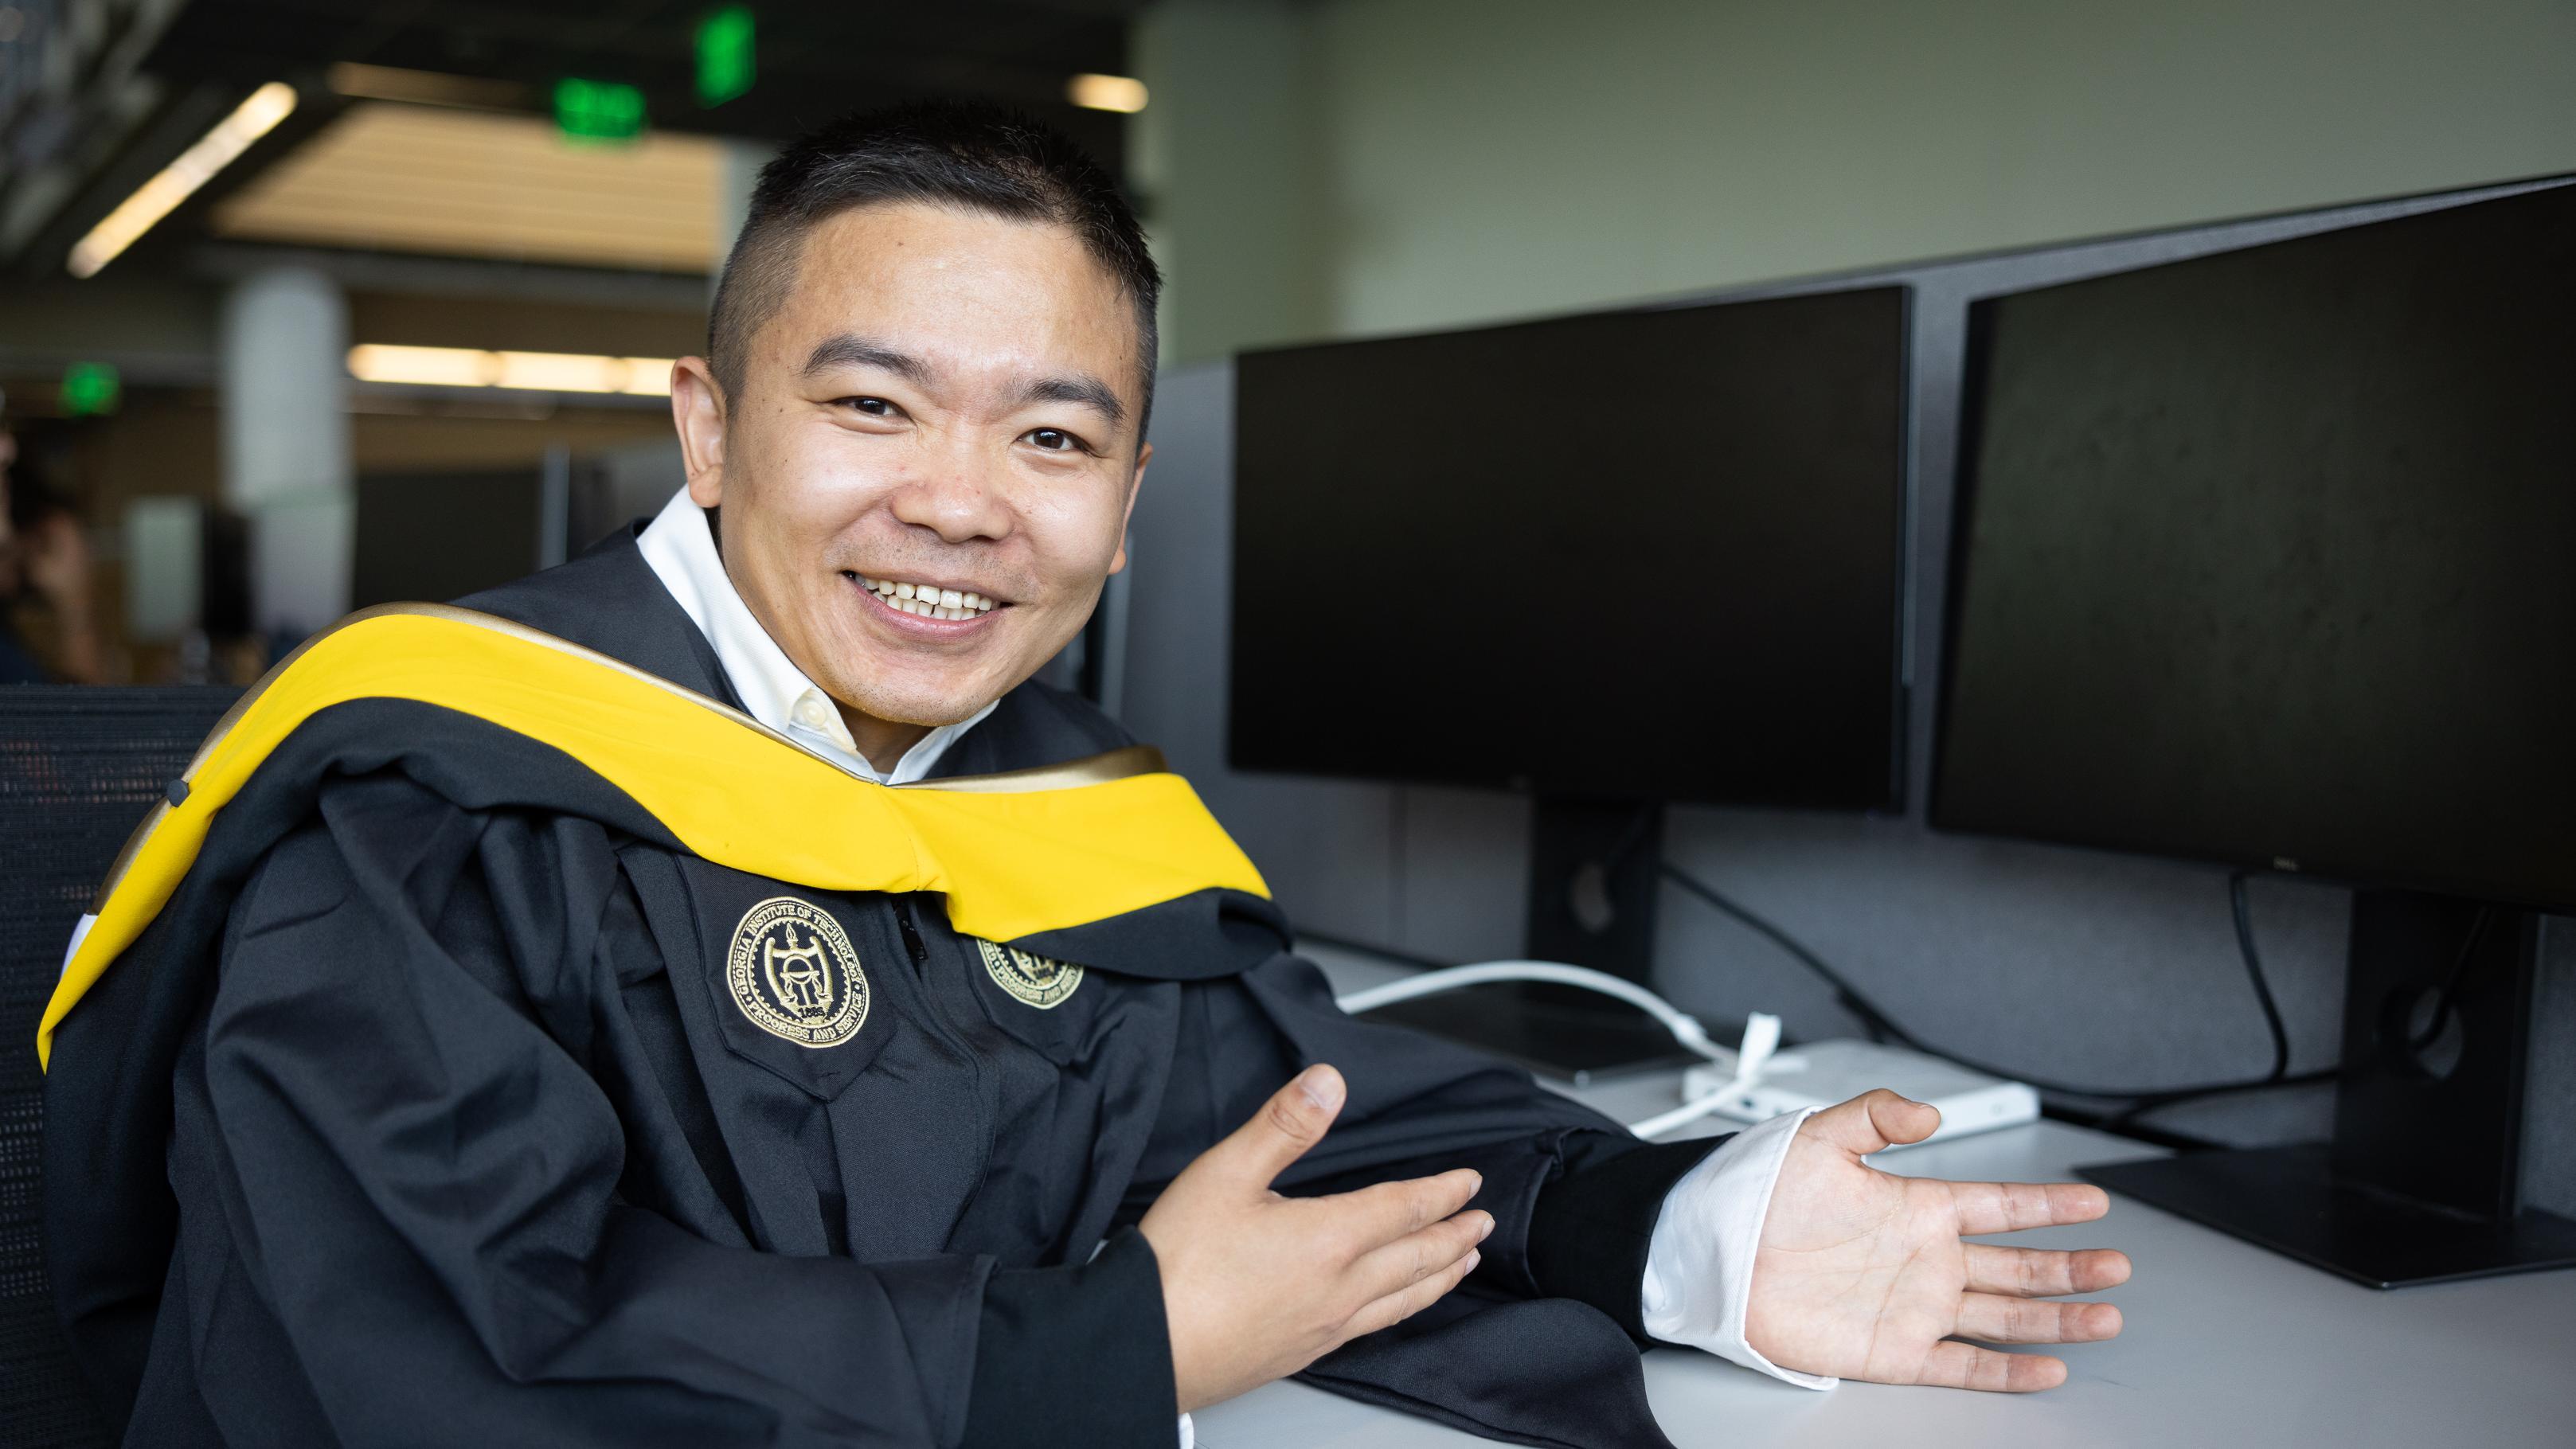 Man in graduation attire sits in front of computers smiling